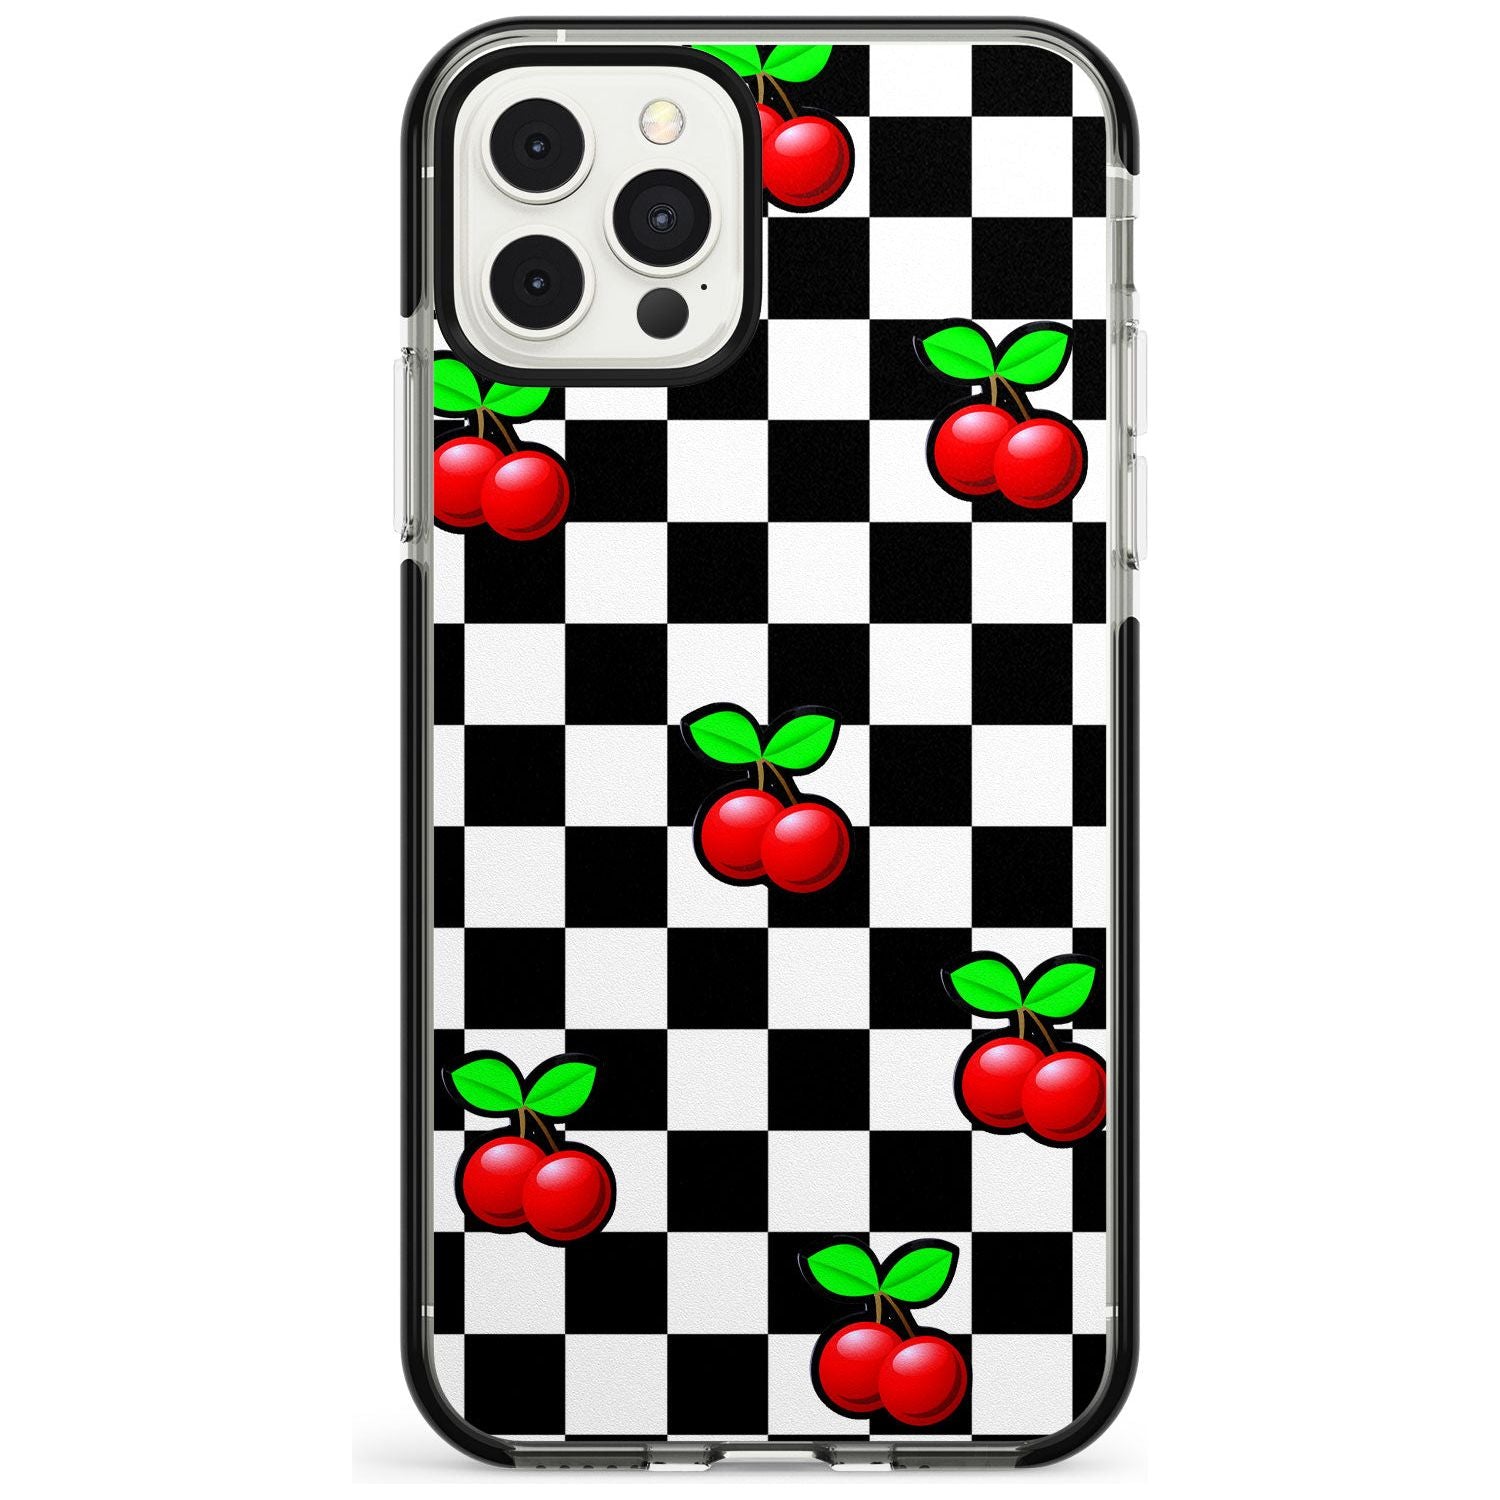 Checkered Cherry Black Impact Phone Case for iPhone 11